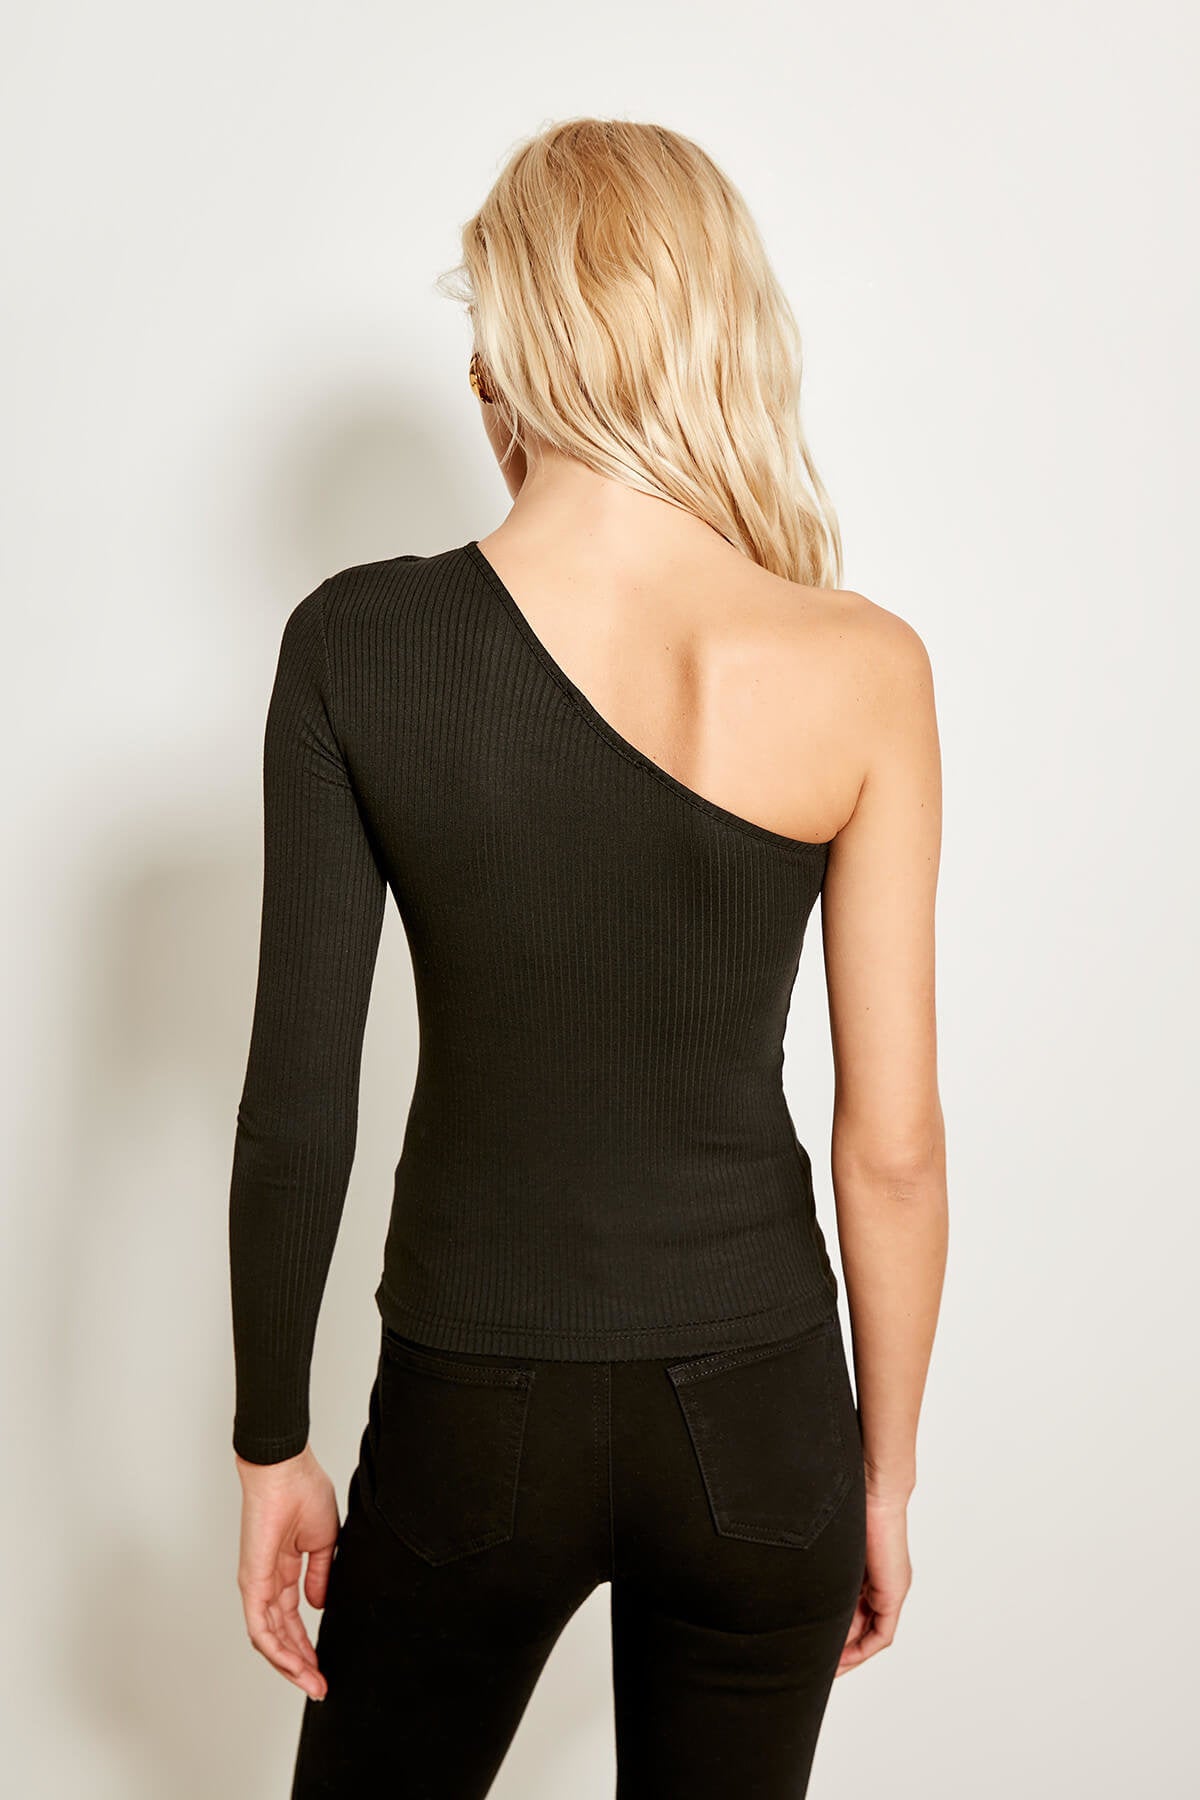 Black One-Sleeved Knitwear Sweater - Cut out Detail